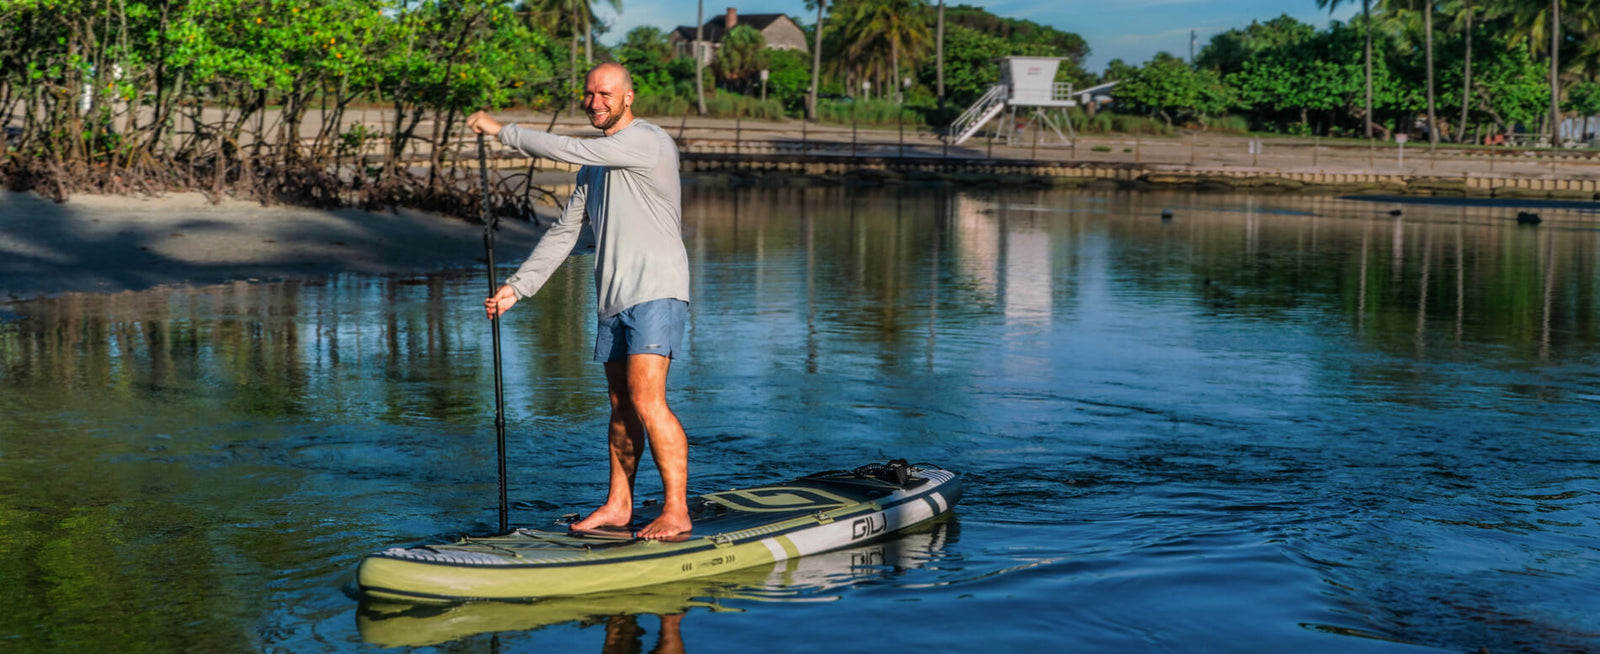 Paddle Board Technique - How to Paddle Board on Your Knees